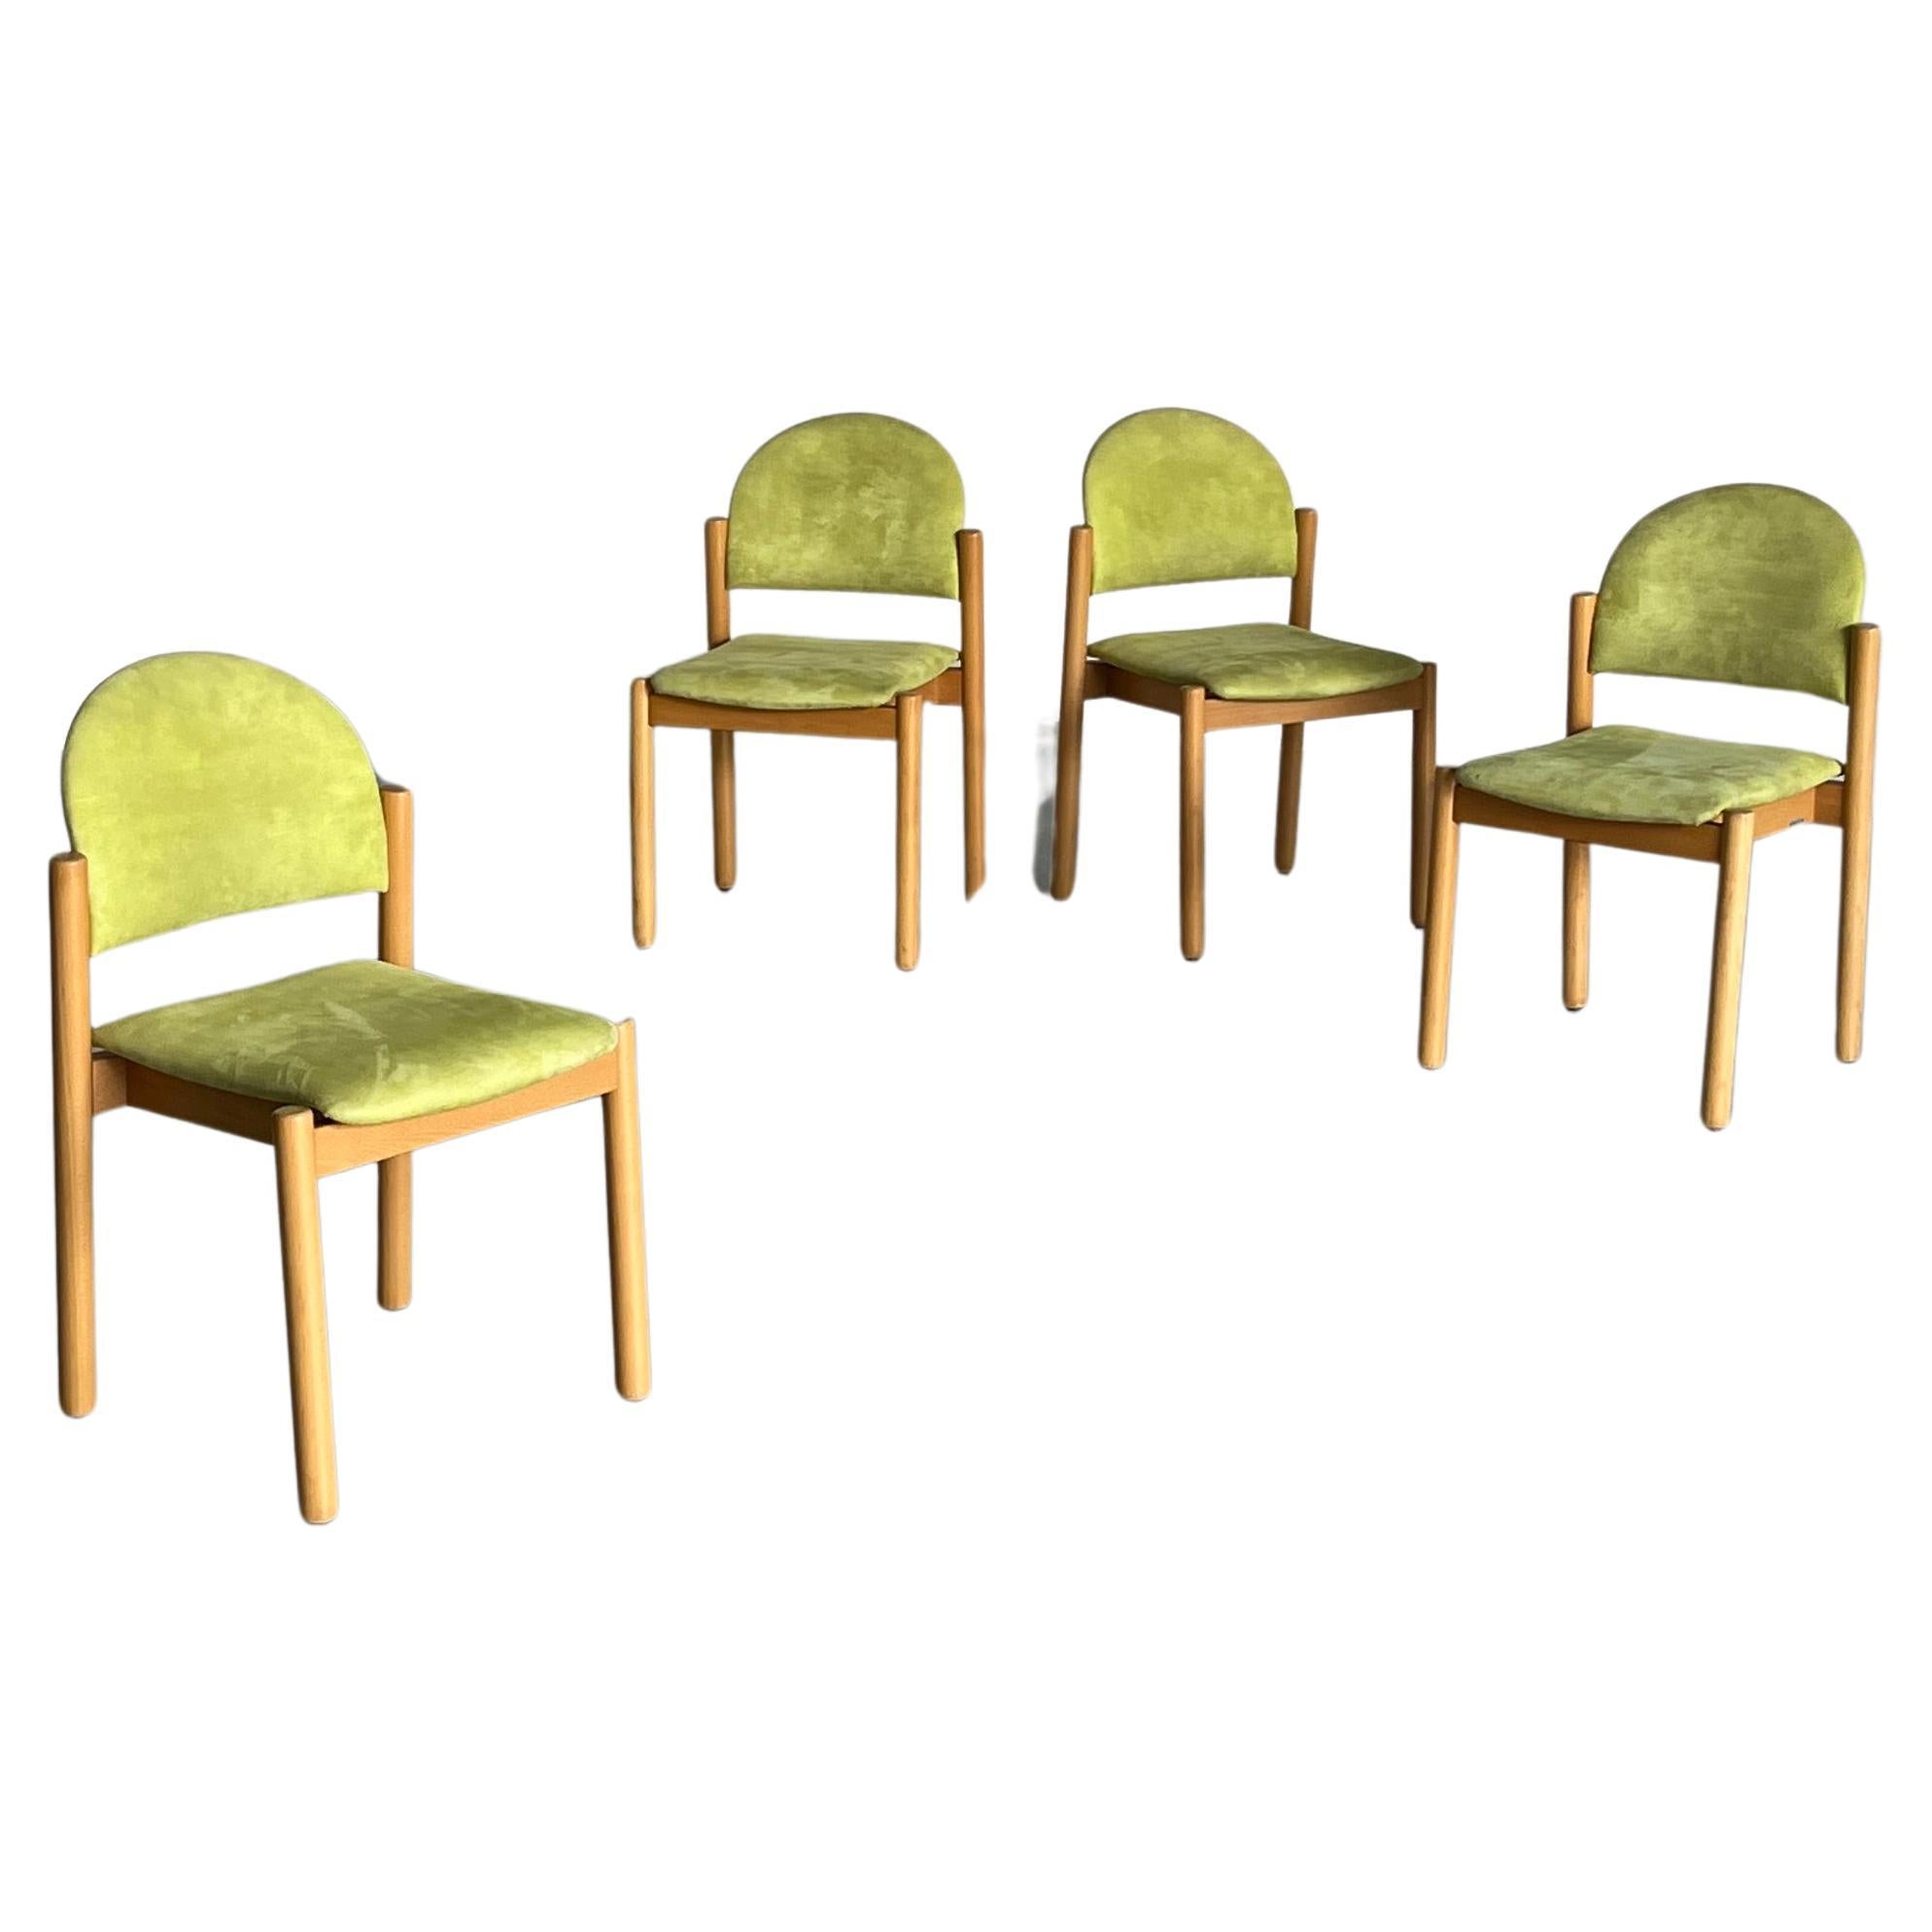 Set of 4 Mid-Century Dining Chairs by Wiesner Hager in Light Green Upholstery